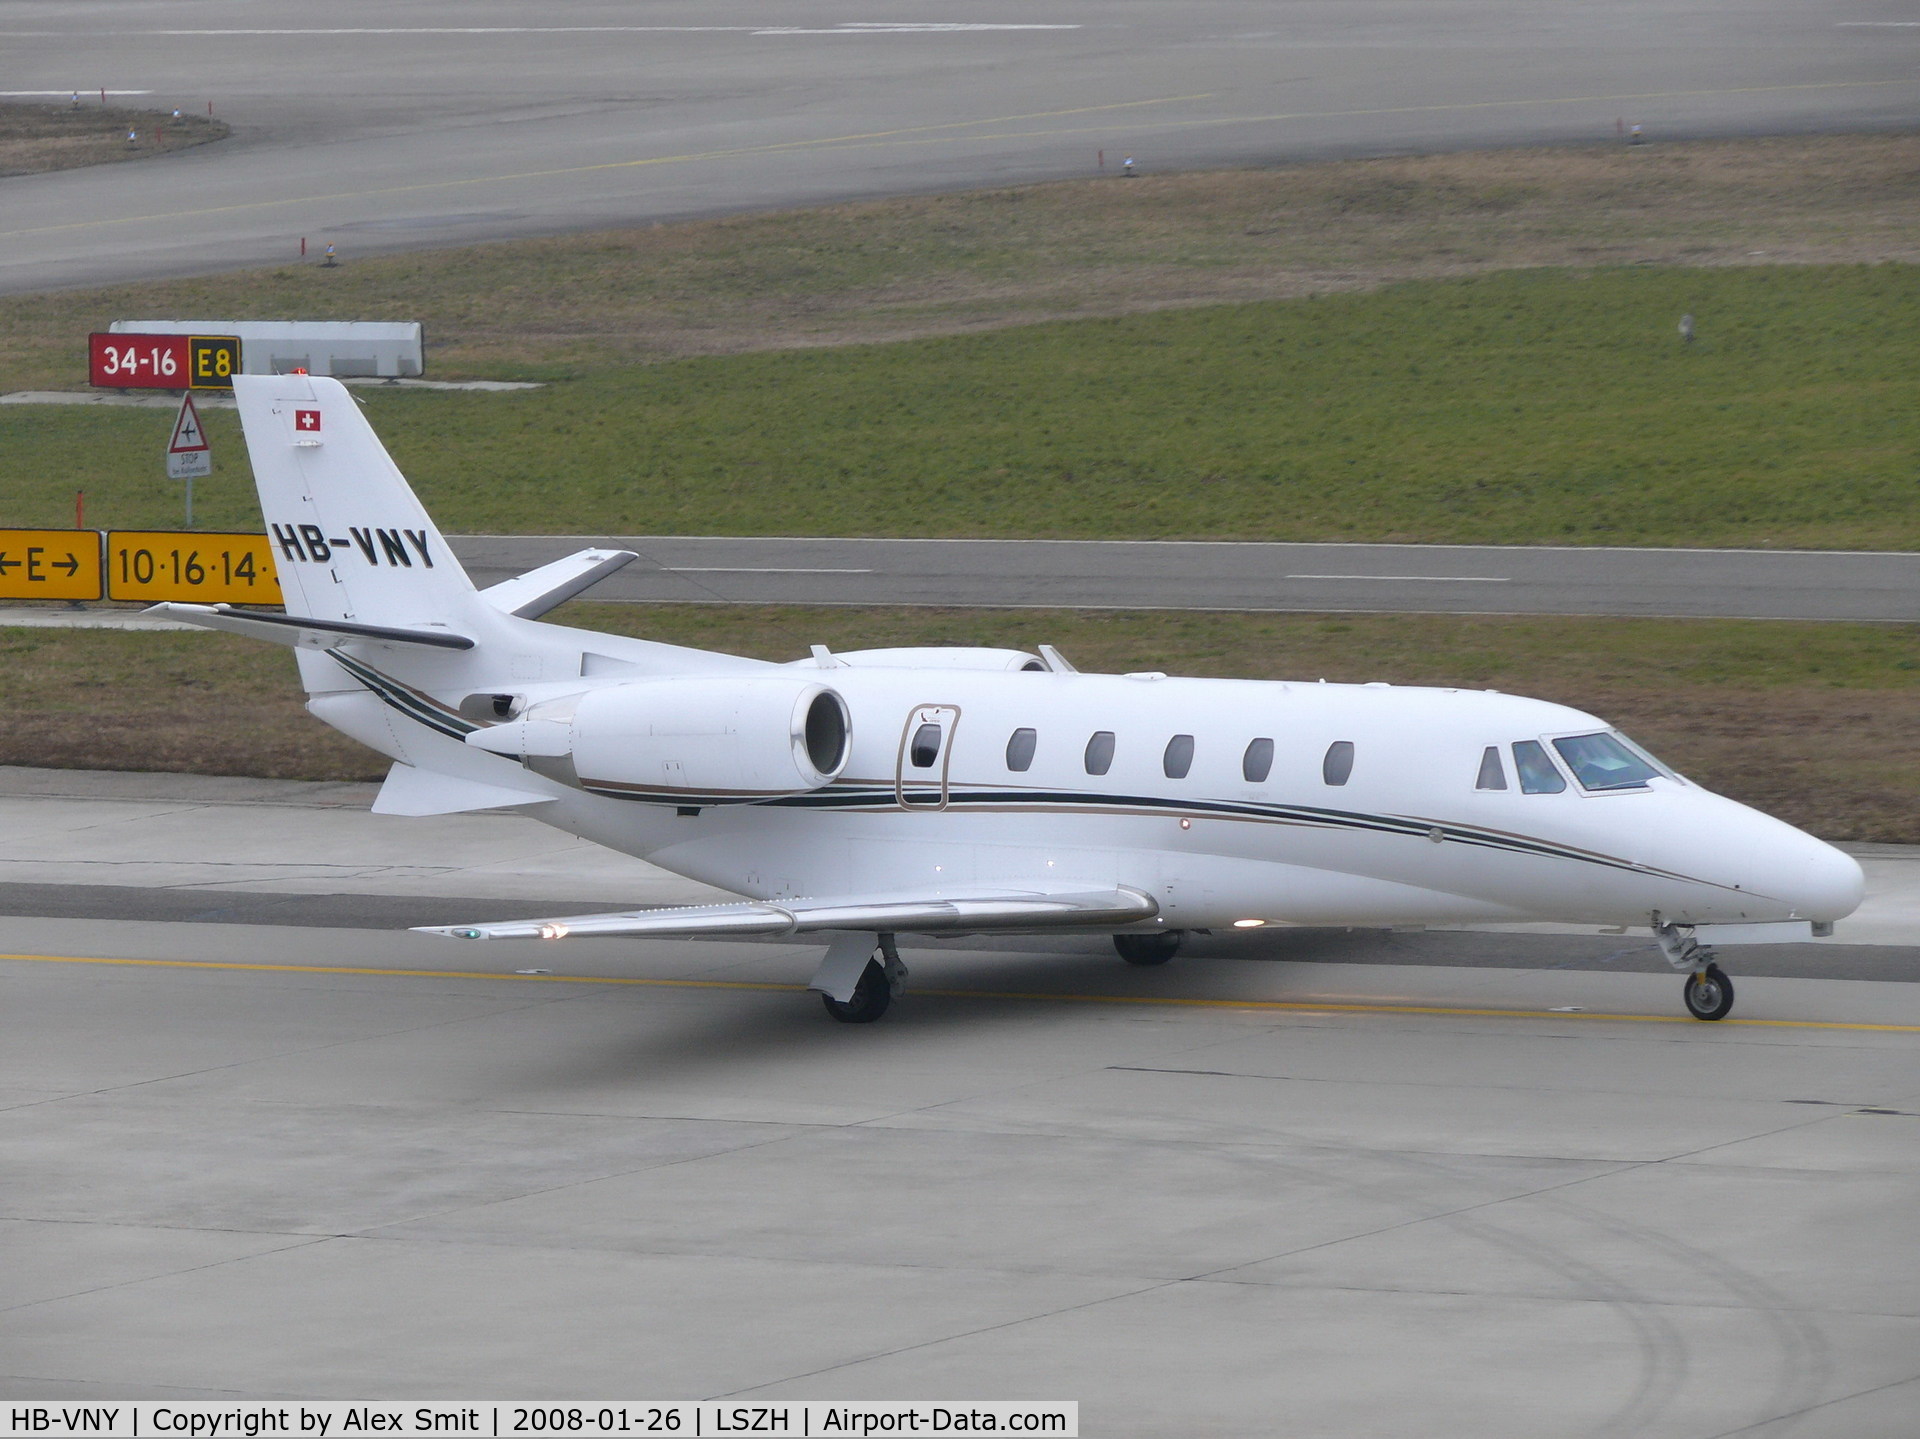 HB-VNY, 2005 Cessna 560XLS C/N 5576, Visitor for the World Economics Forum 2008